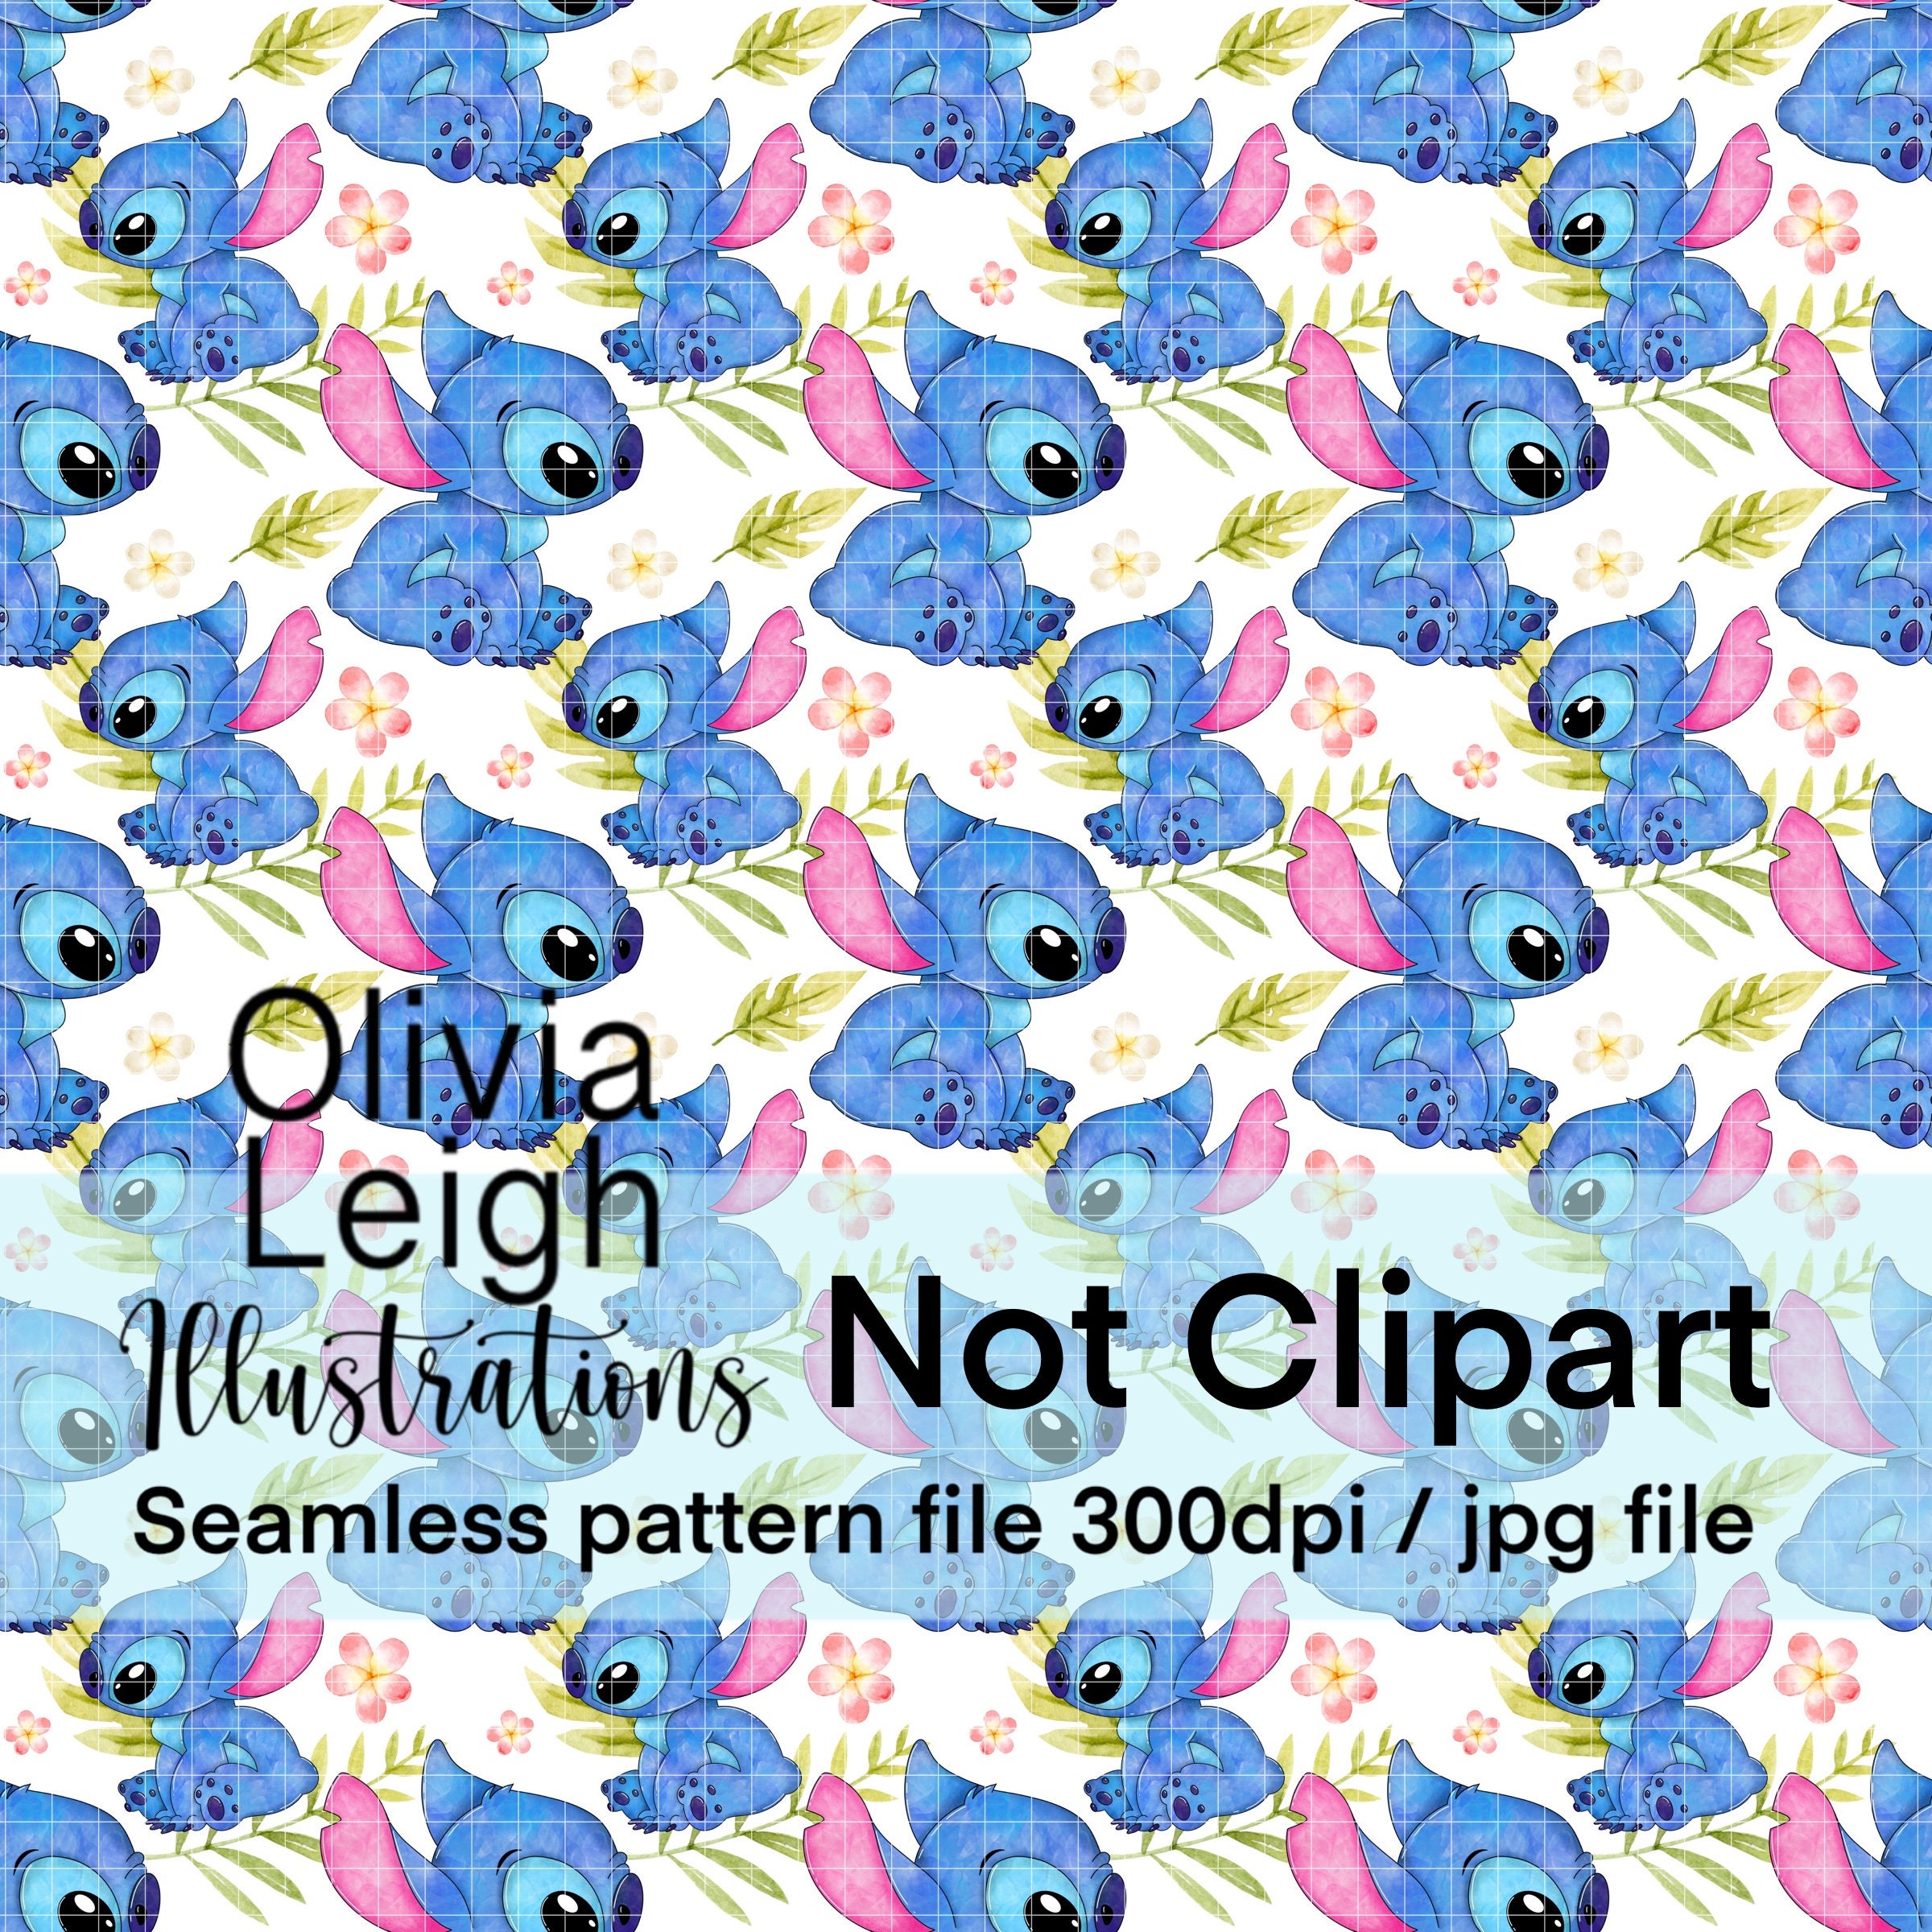 Lilo and Stitch Christmas Seamless Party Printable, Stationary, Cards,  Digital Paper, Scrapbook Paper, 12x12 Paper, Giggleboxdesignshop 